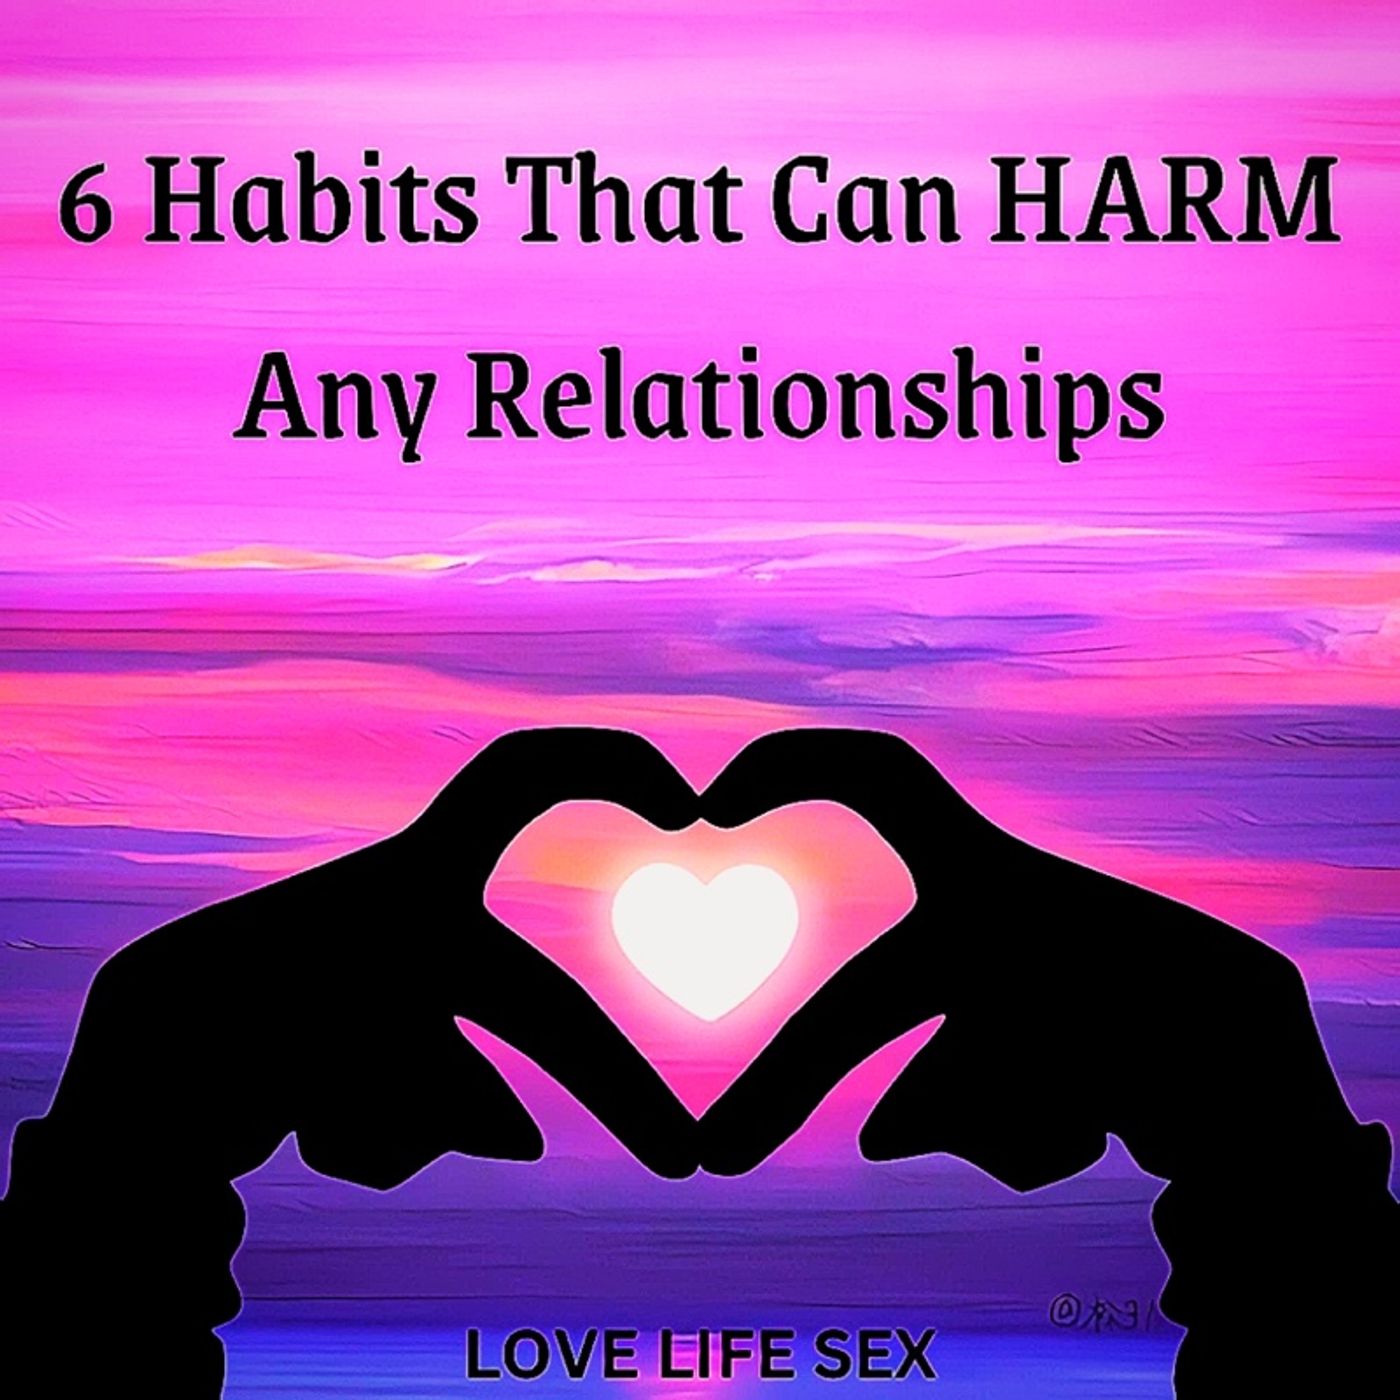 6 Habits That Can HARM Any Relationships ❤️